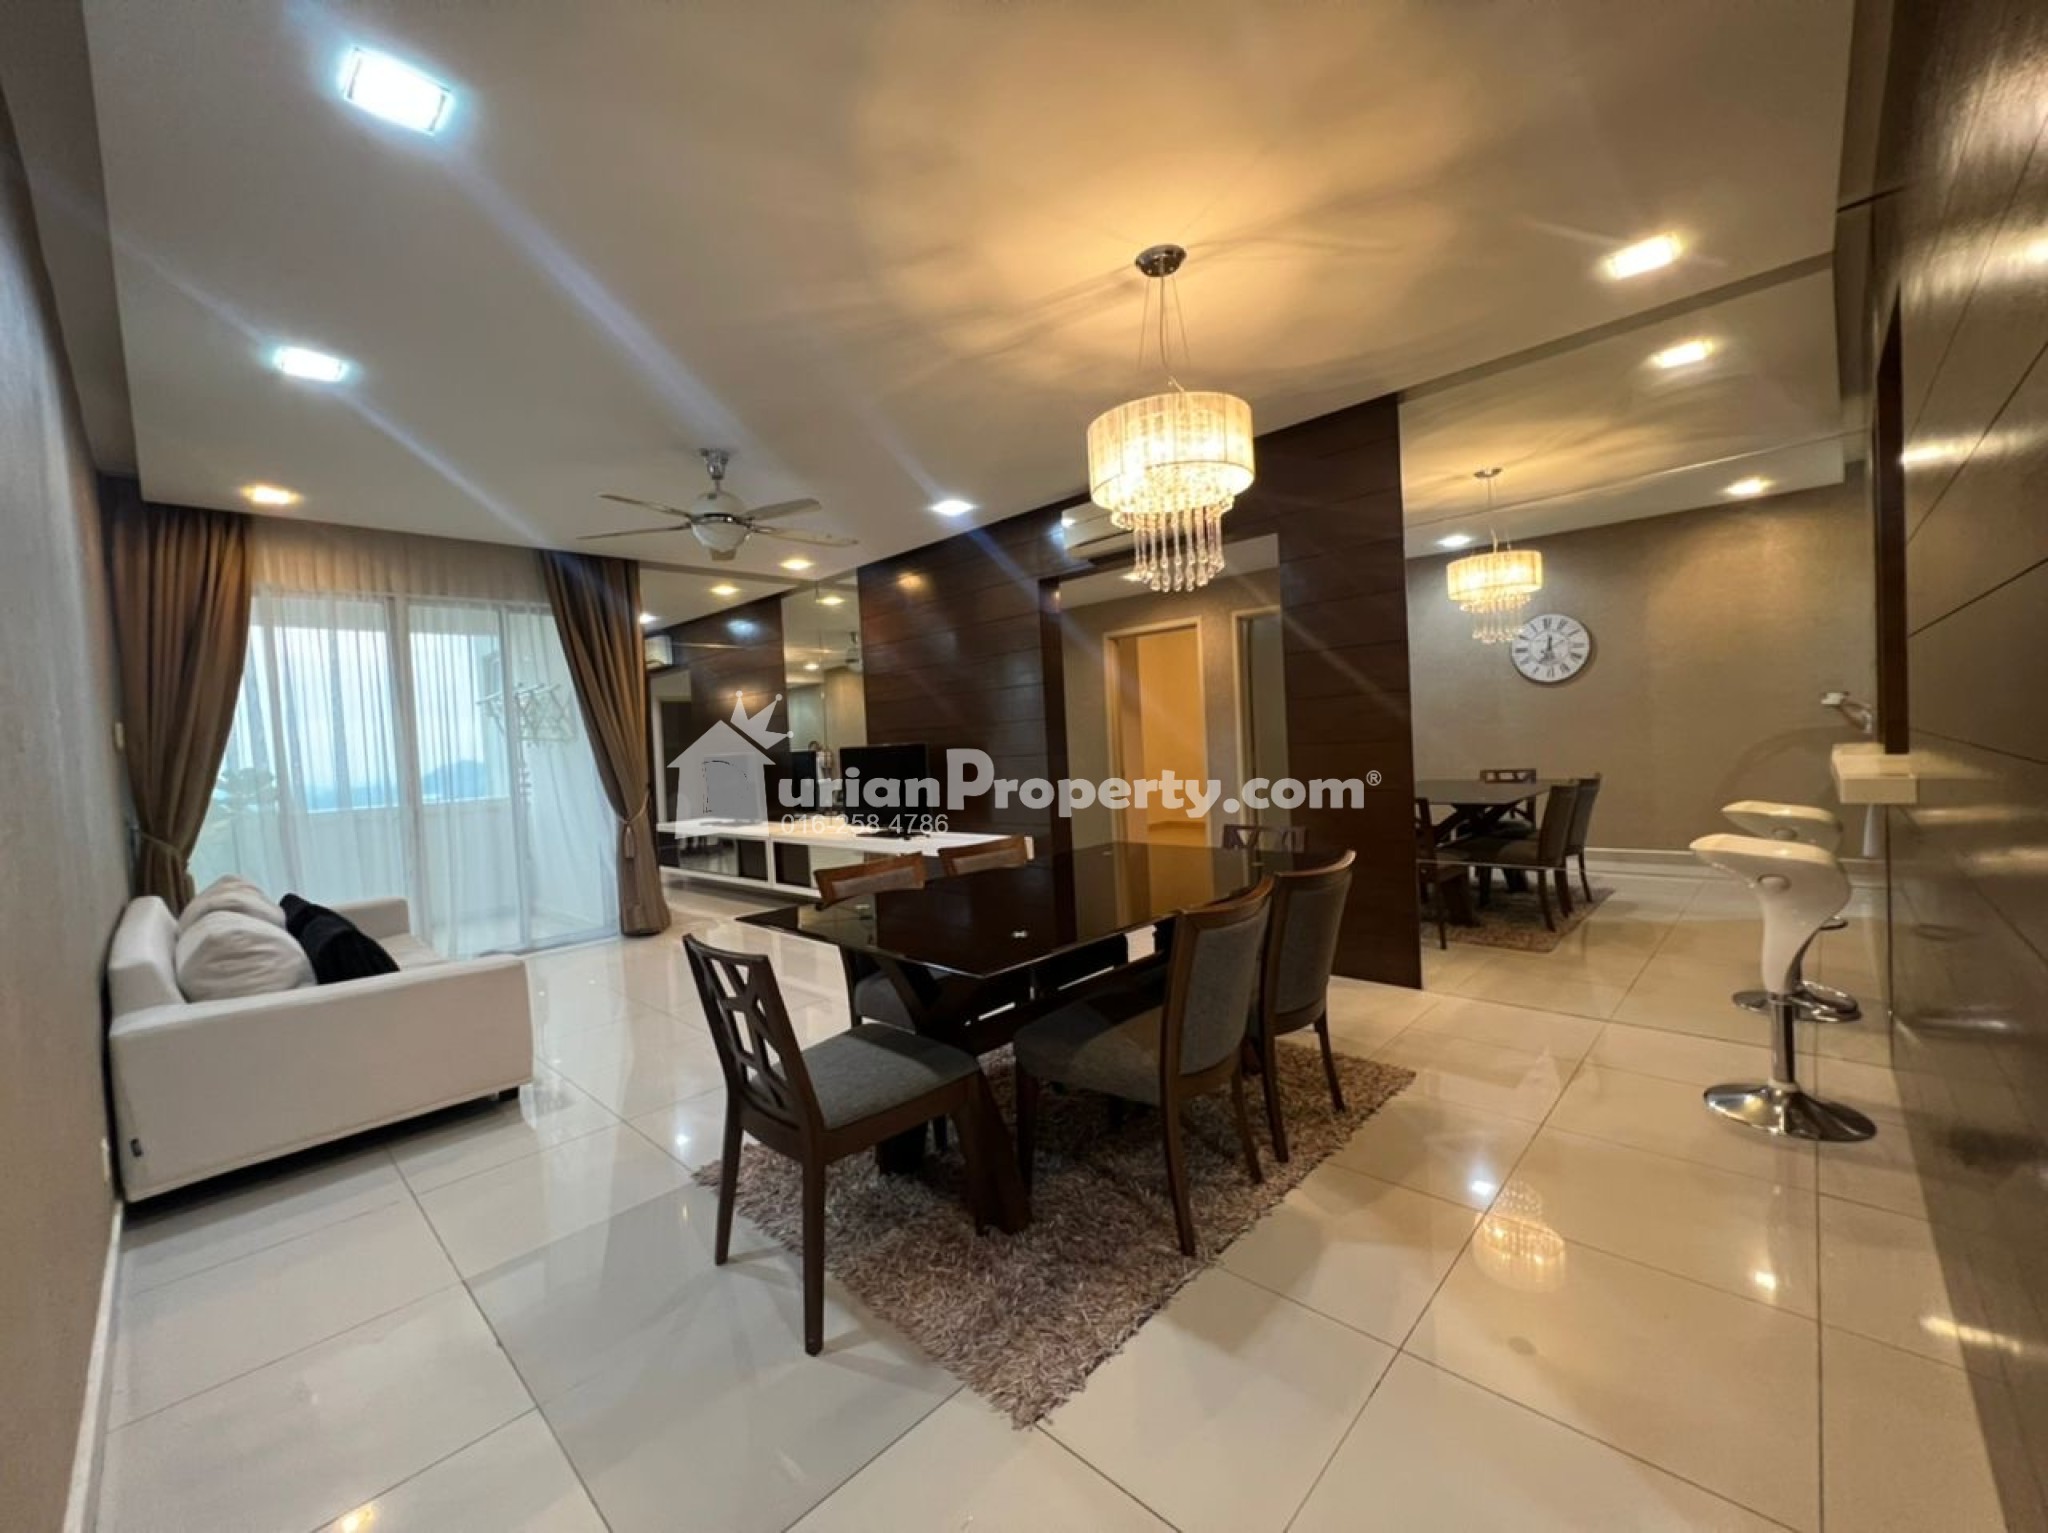 Condo For Sale at Aman Heights